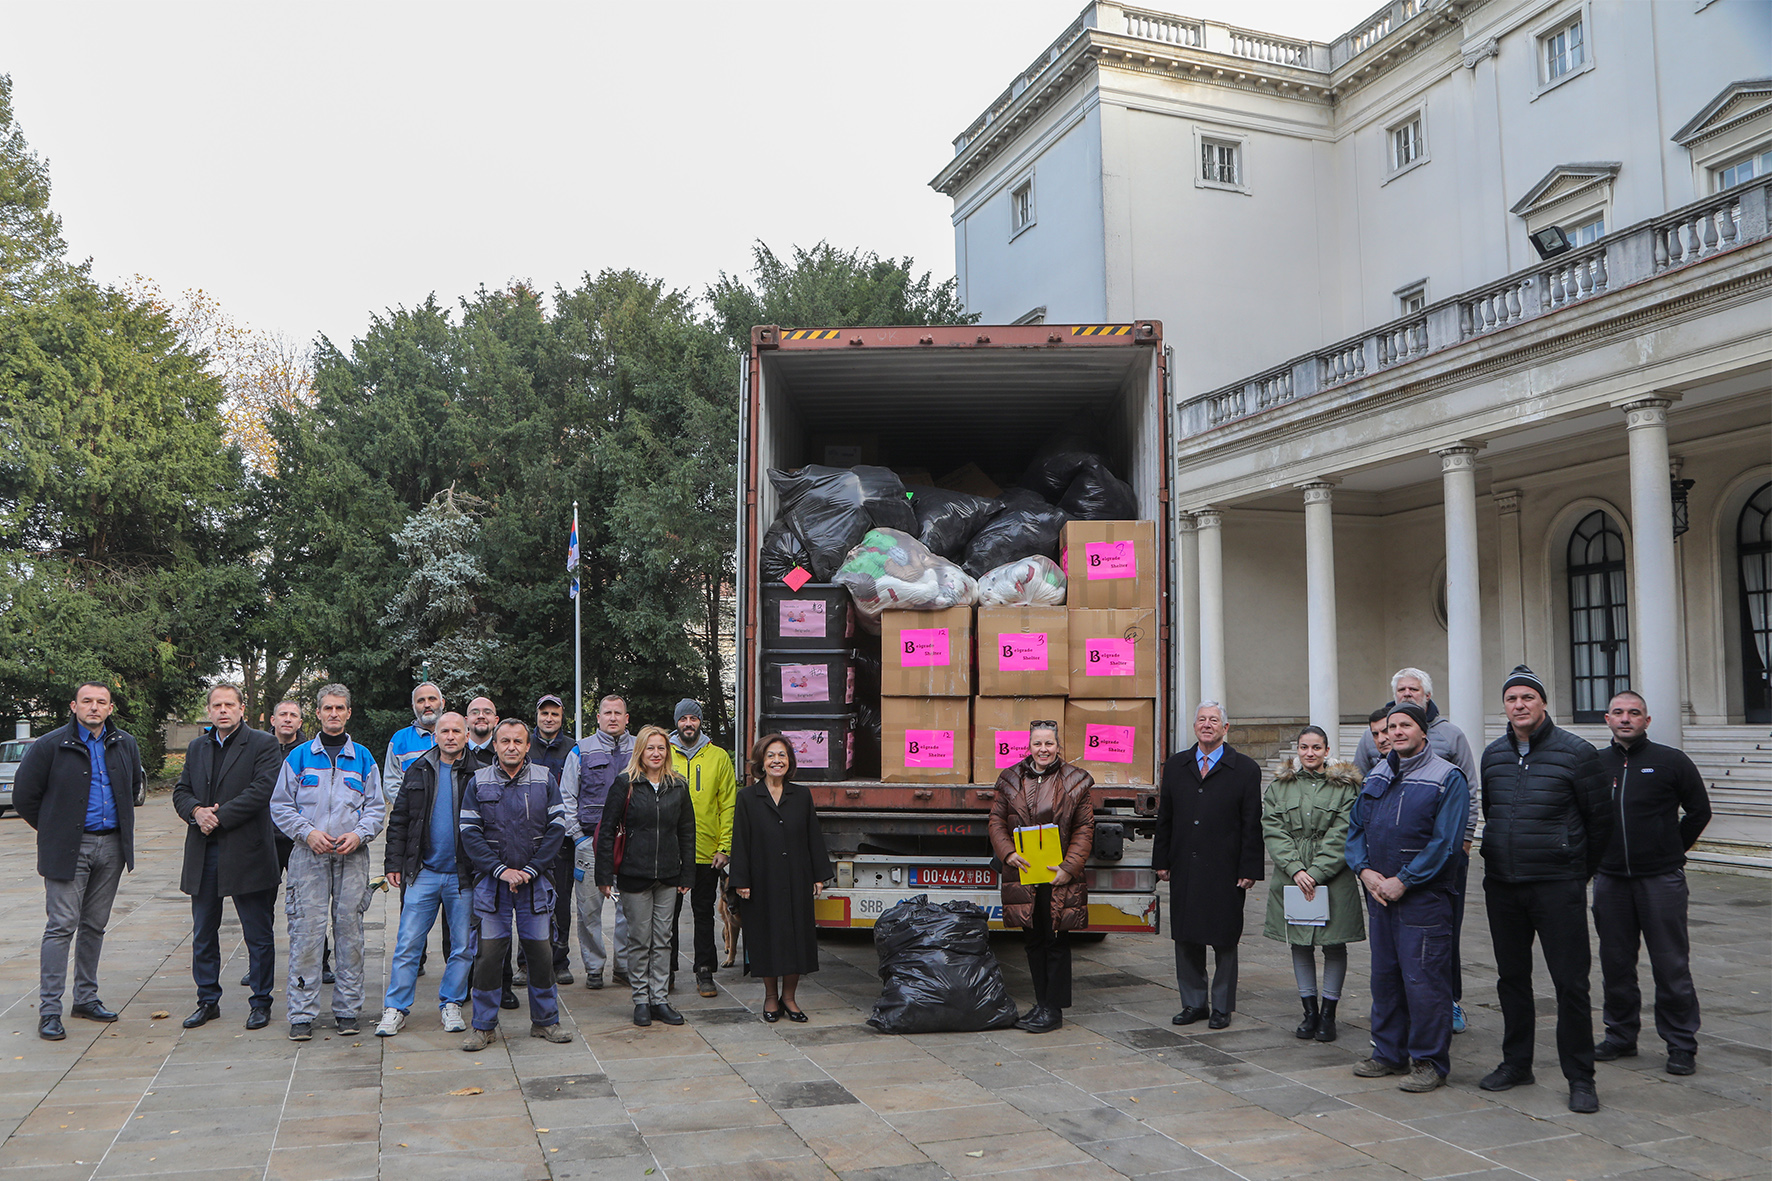 LIFELINE CHICAGO’S CHRISTMAS GIFTS FOR THE ORPHANS ARRIVE AT THE ROYAL PALACE